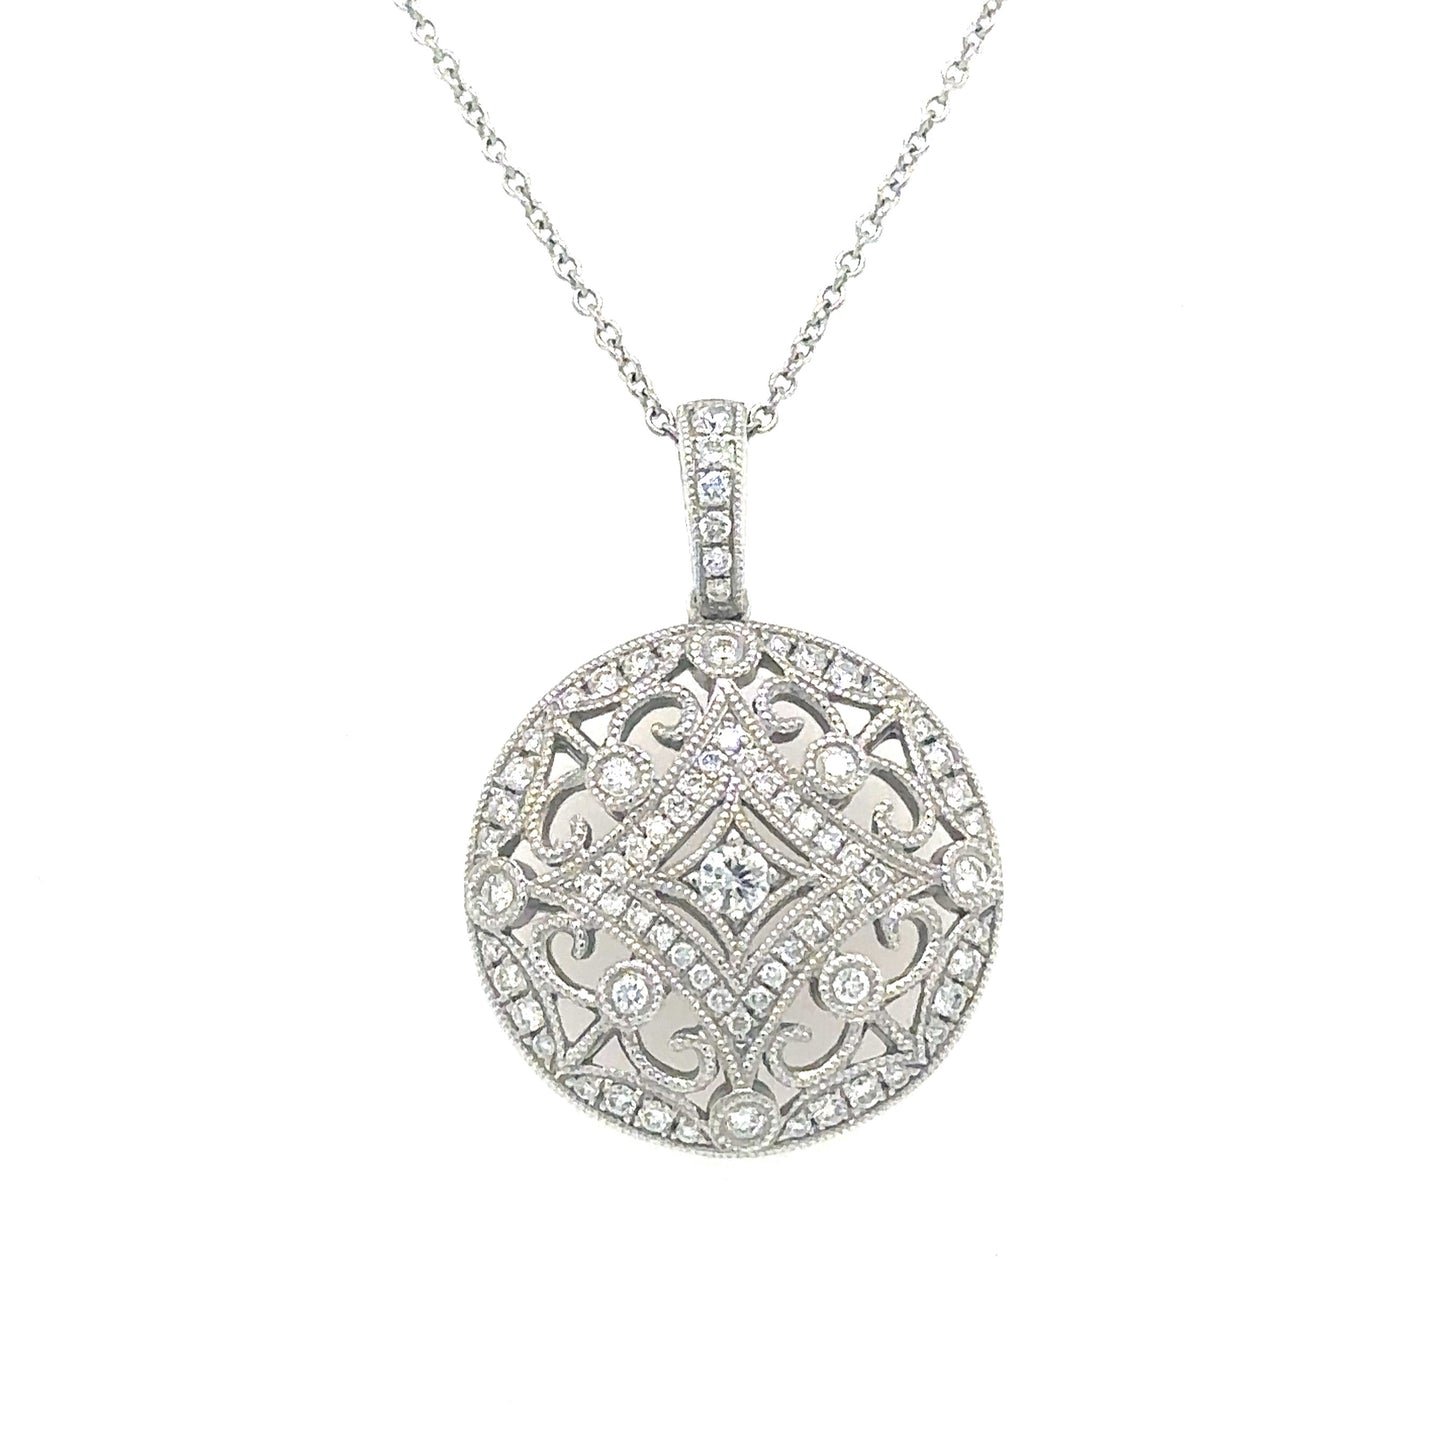 18KT White Gold And Diamond Necklace